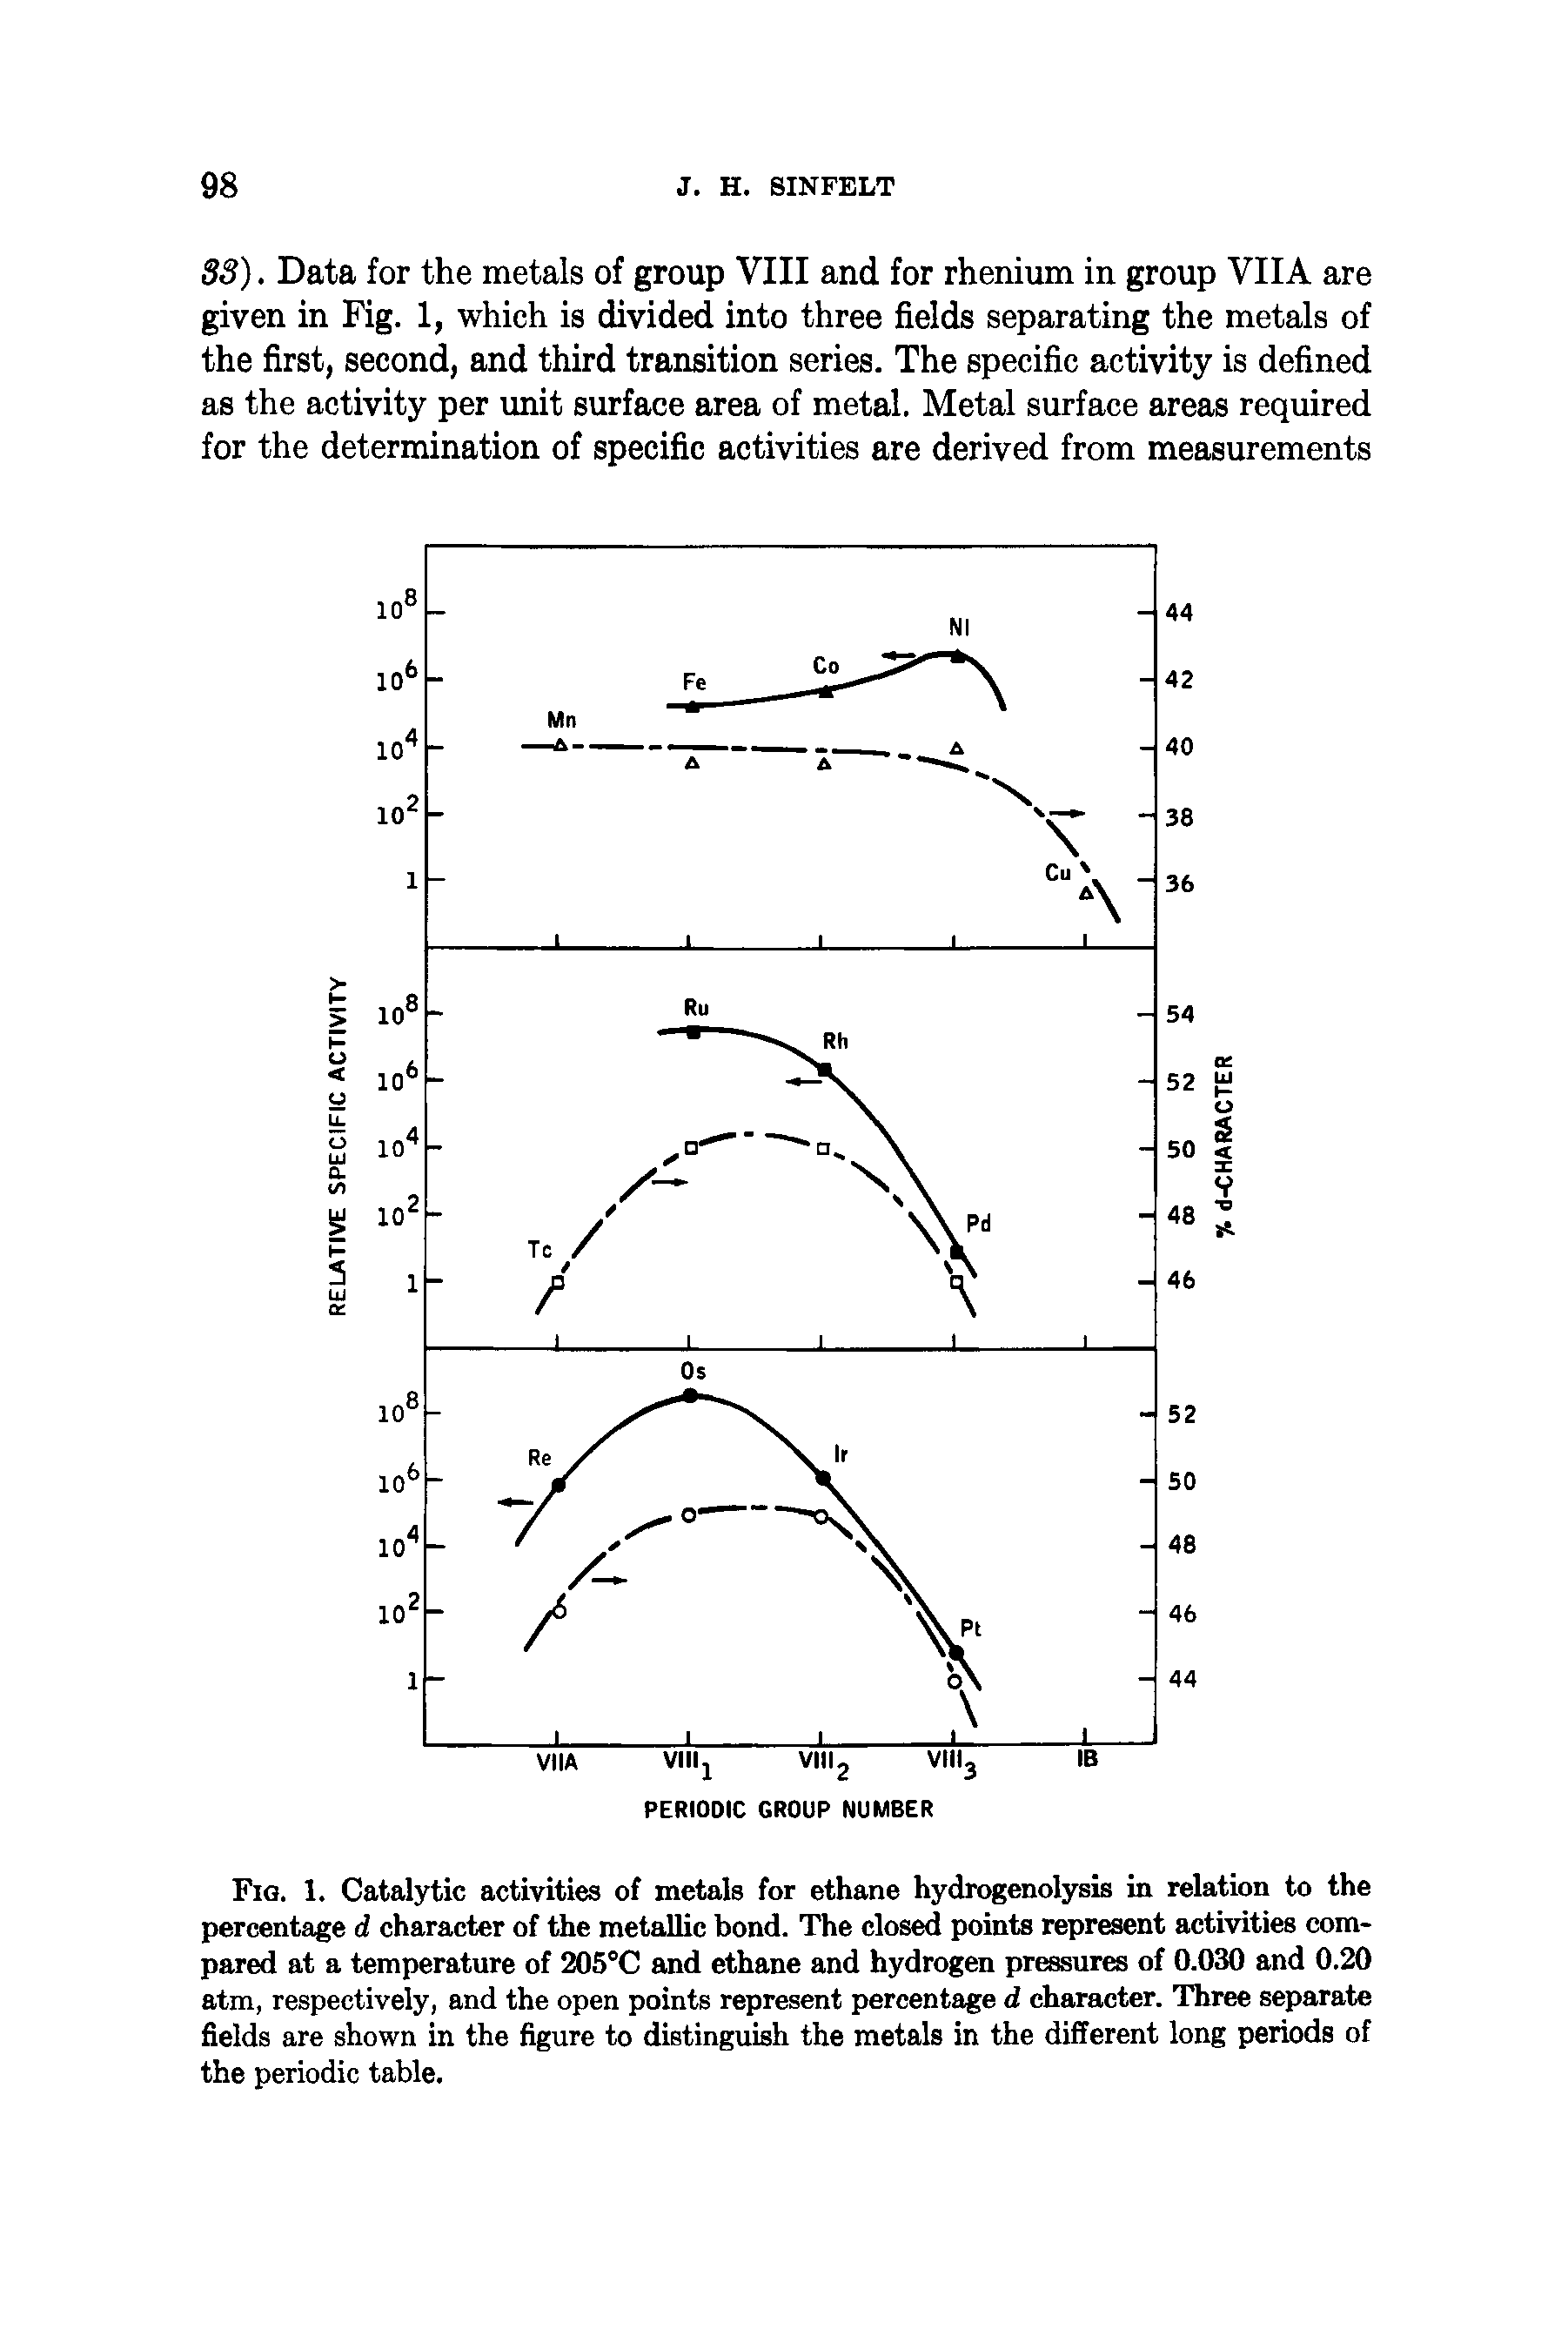 Fig. 1. Catalytic activities of metals for ethane hydrogenolysis in relation to the percentage d character of the metallic bond. The closed points represent activities compared at a temperature of 205°C and ethane and hydrogen pressures of 0.030 and 0.20 atm, respectively, and the open points represent percentage d character. Three separate fields are shown in the figure to distinguish the metals in the different long periods of the periodic table.